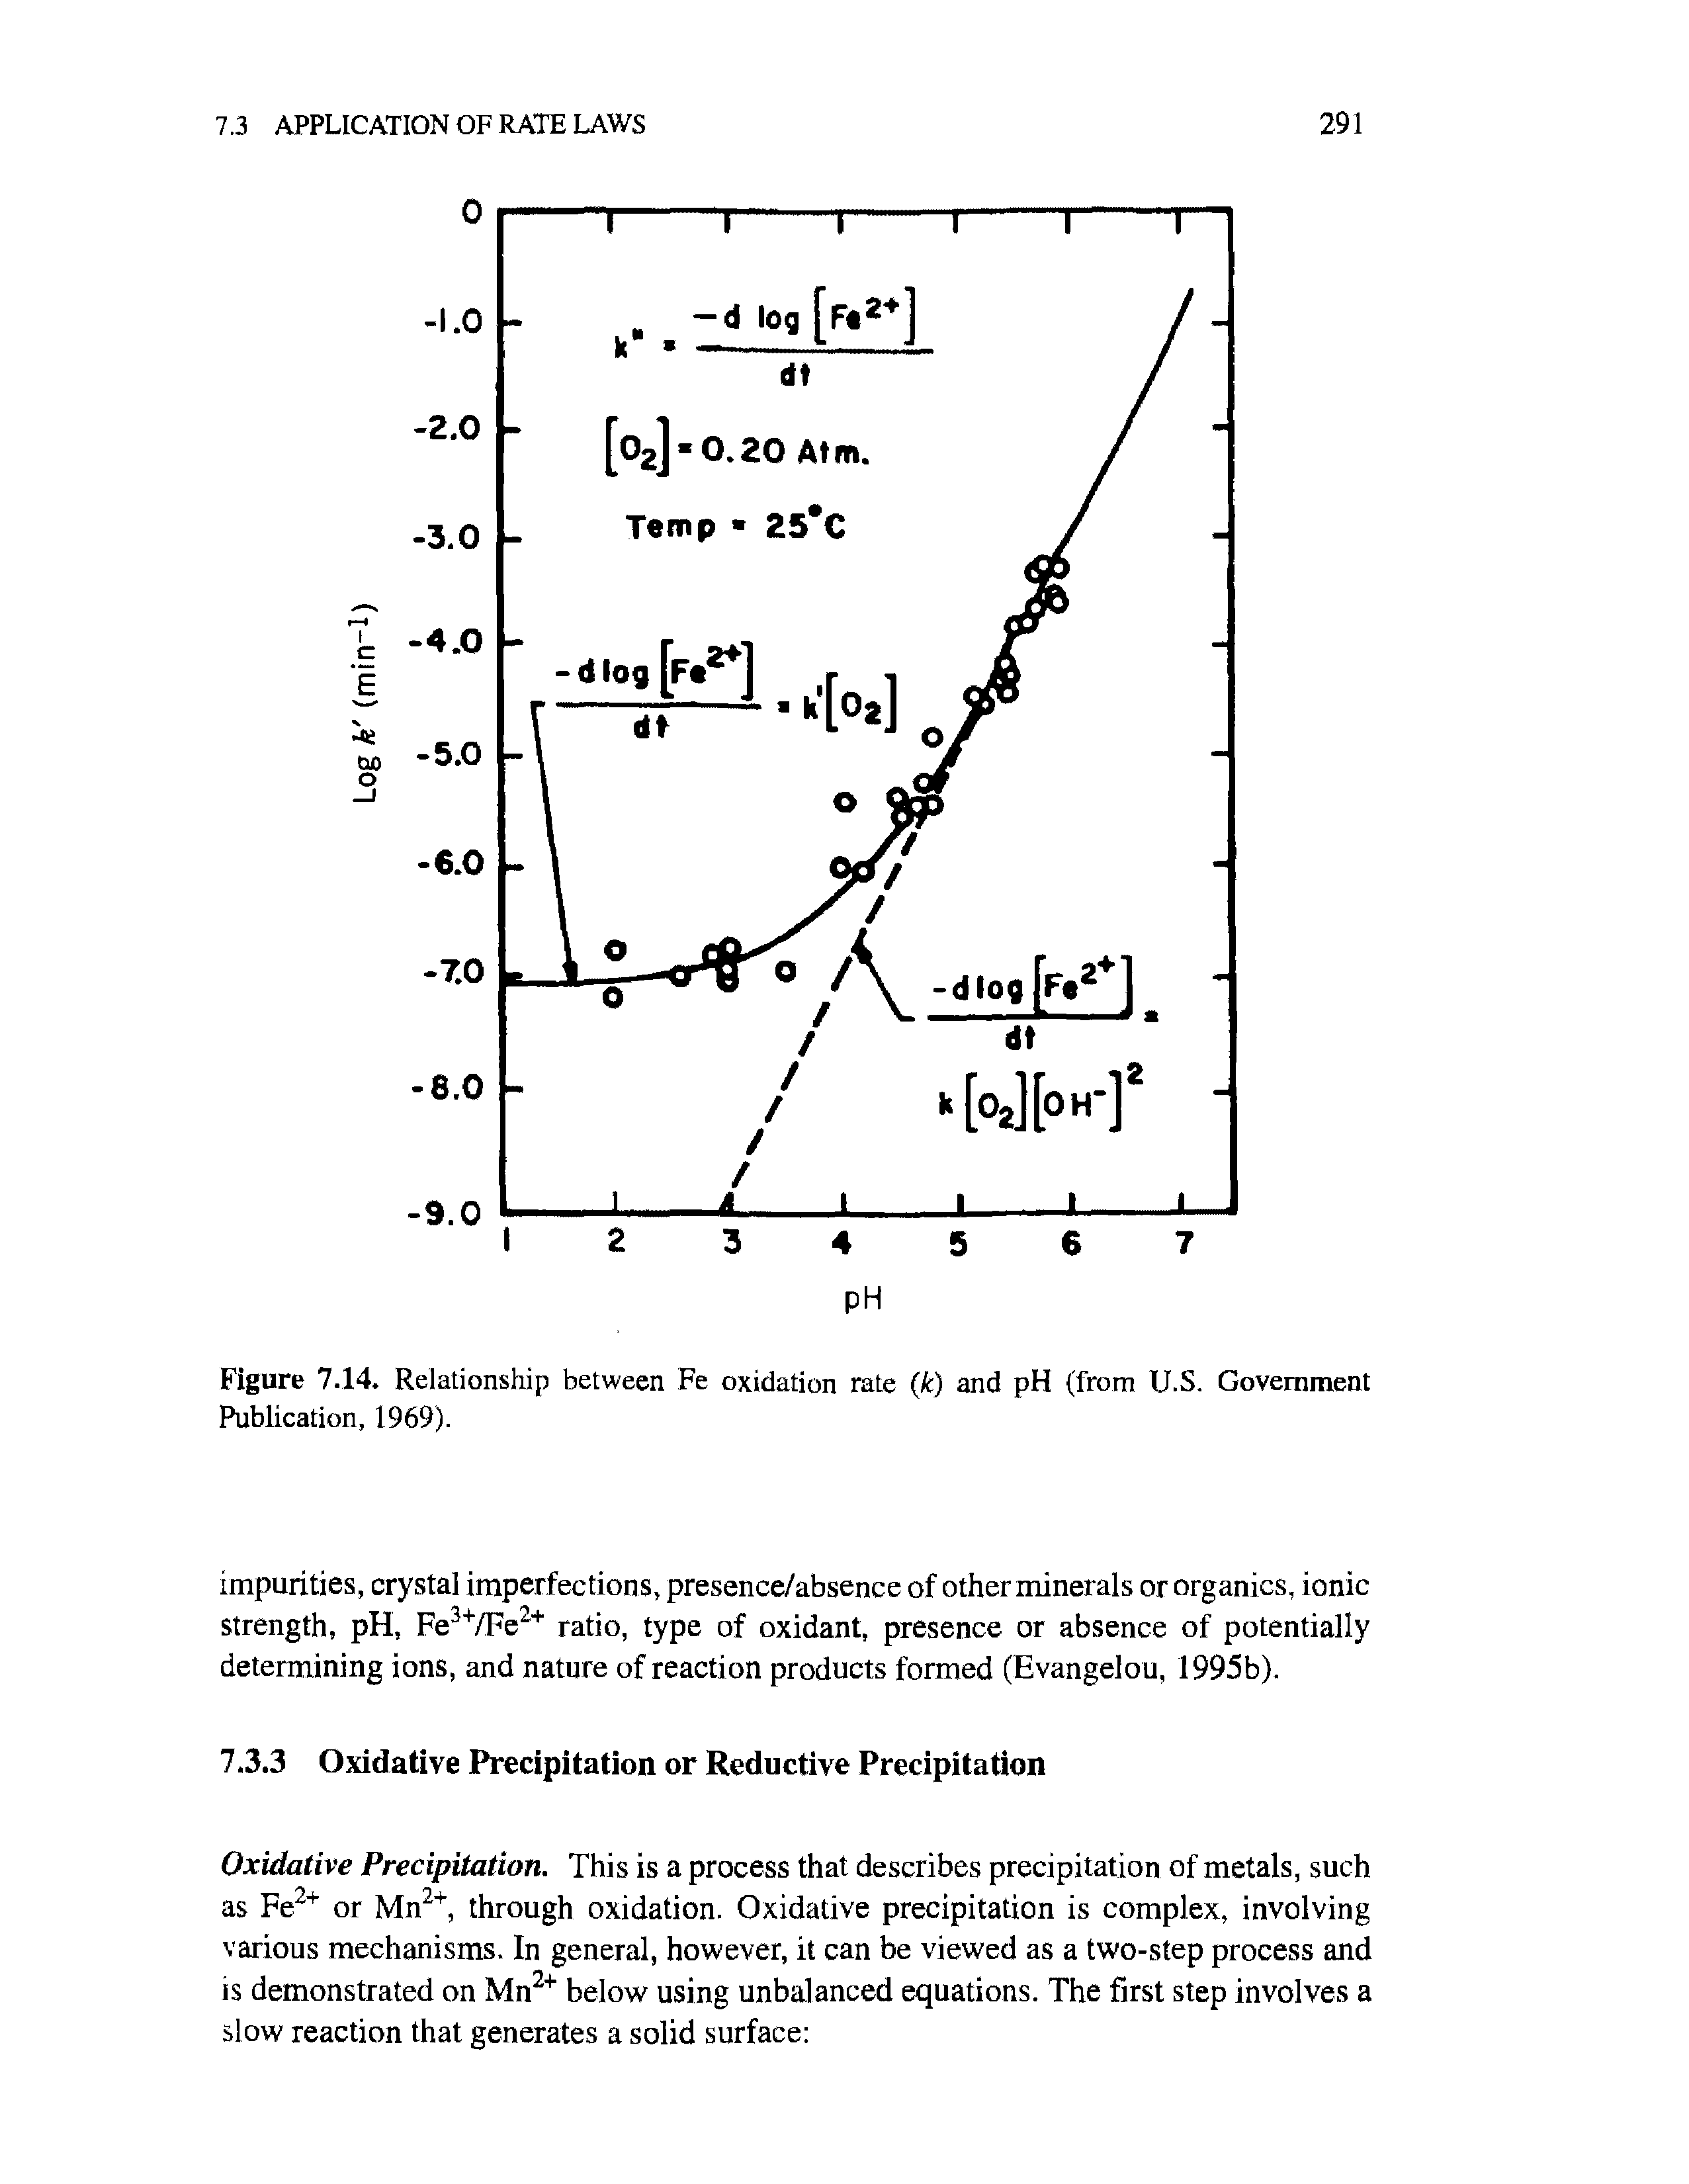 Figure 7.14. Relationship between Fe oxidation rate (k) and pH (from U.S. Government Publication, 1969).